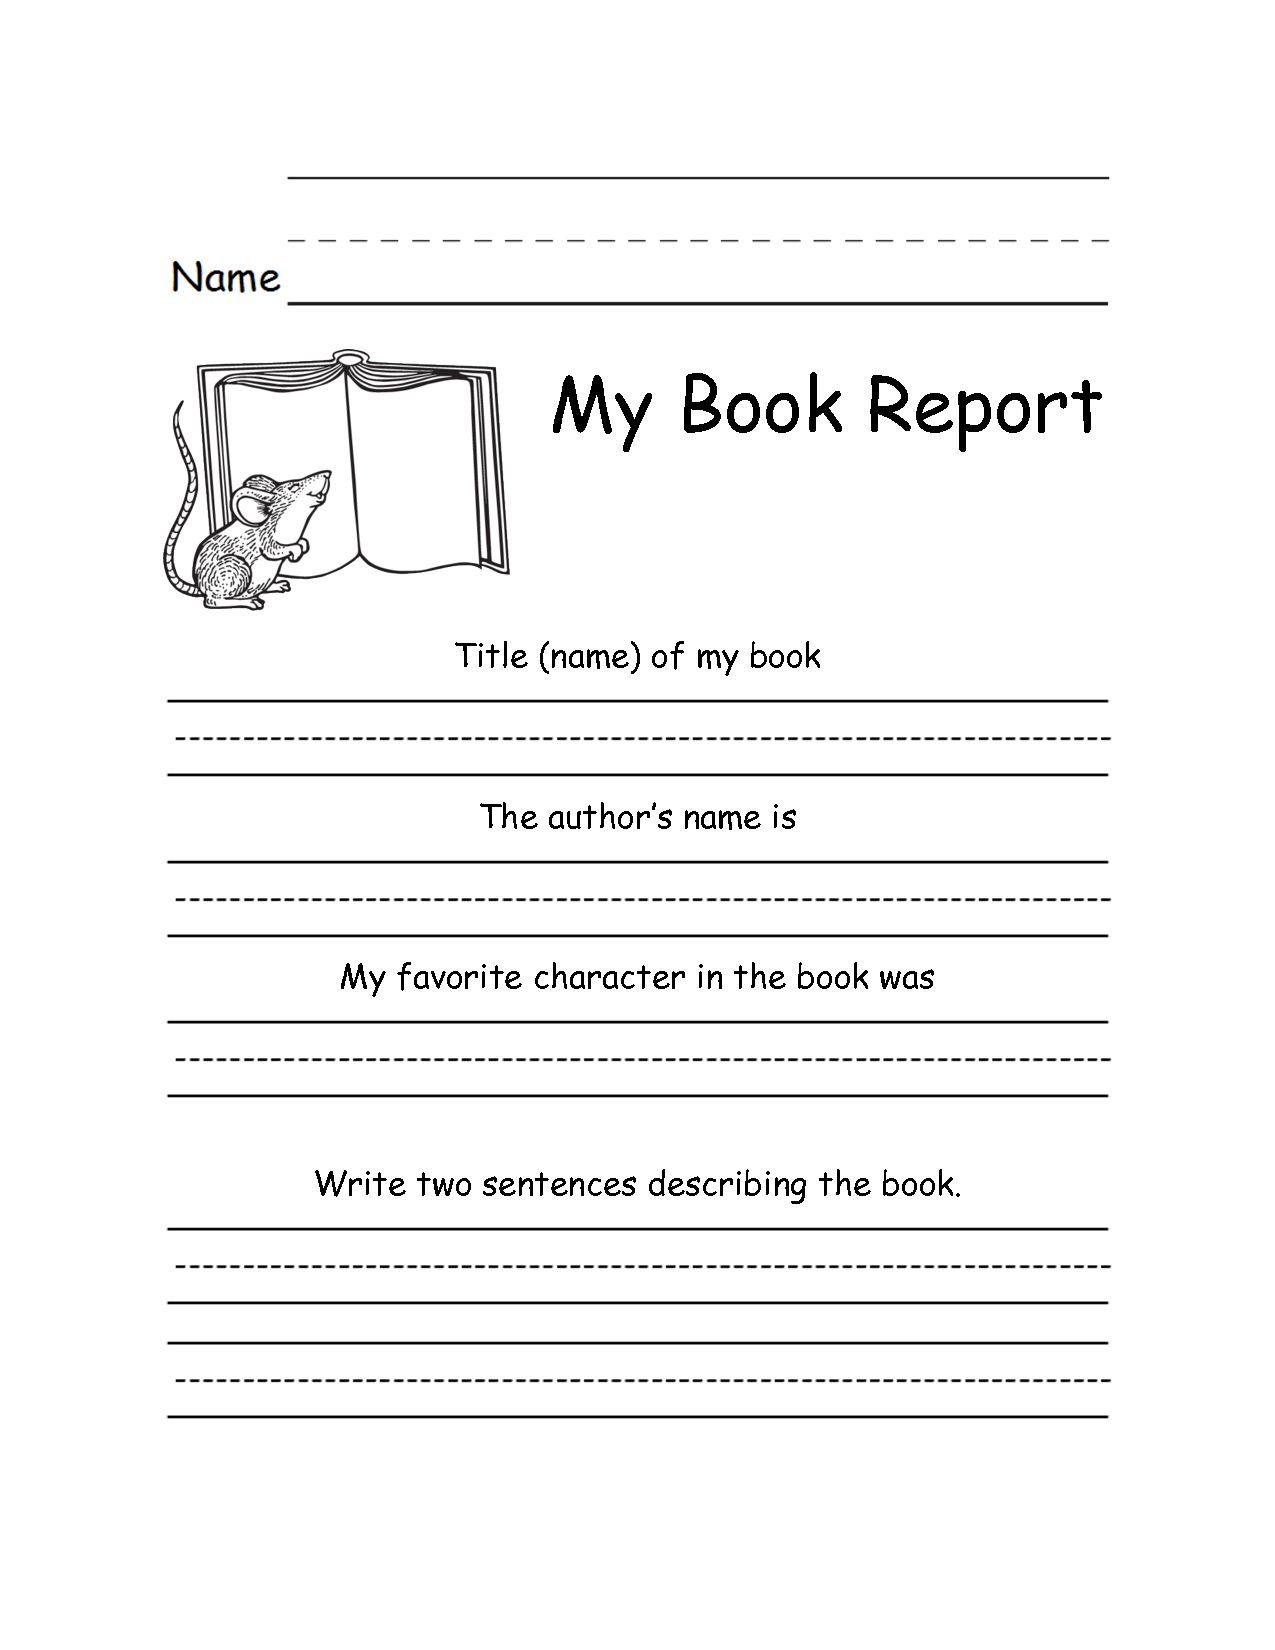 St Or Nd Grade Book Report Formkellysps  Reading  Nd Grade with regard to First Grade Book Report Template